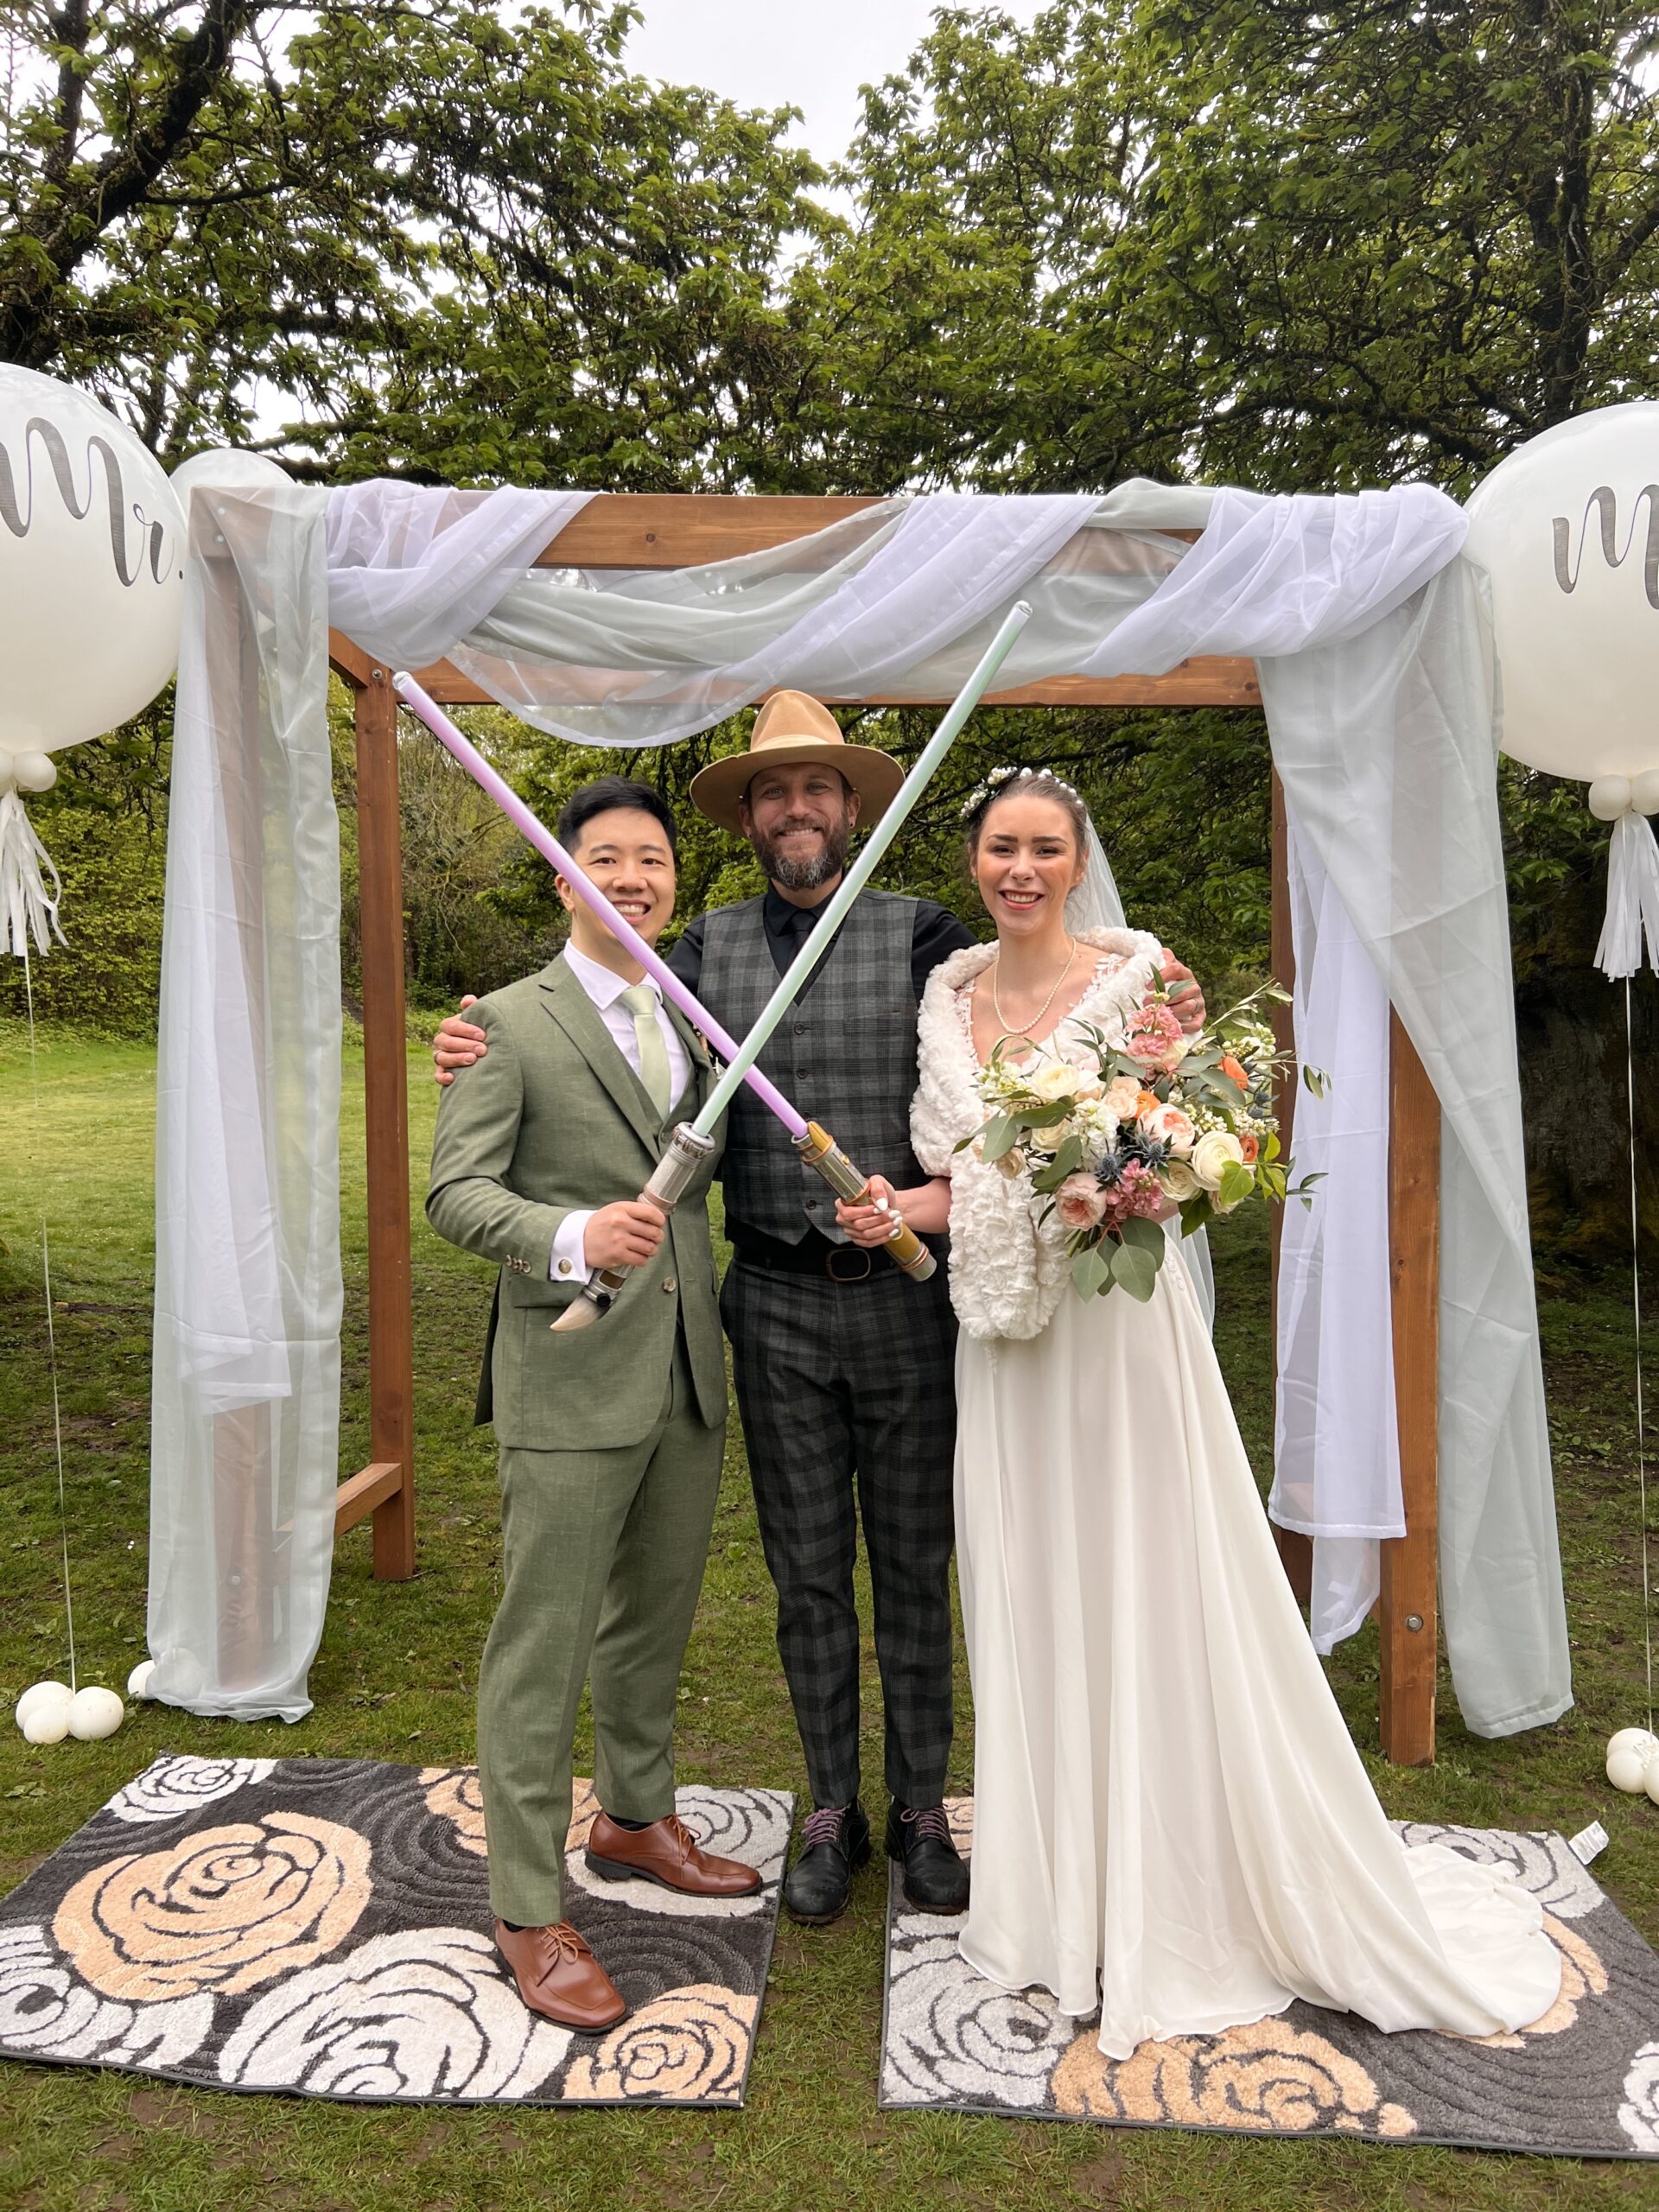 star wars wedding, nerd wedding with young hip & married